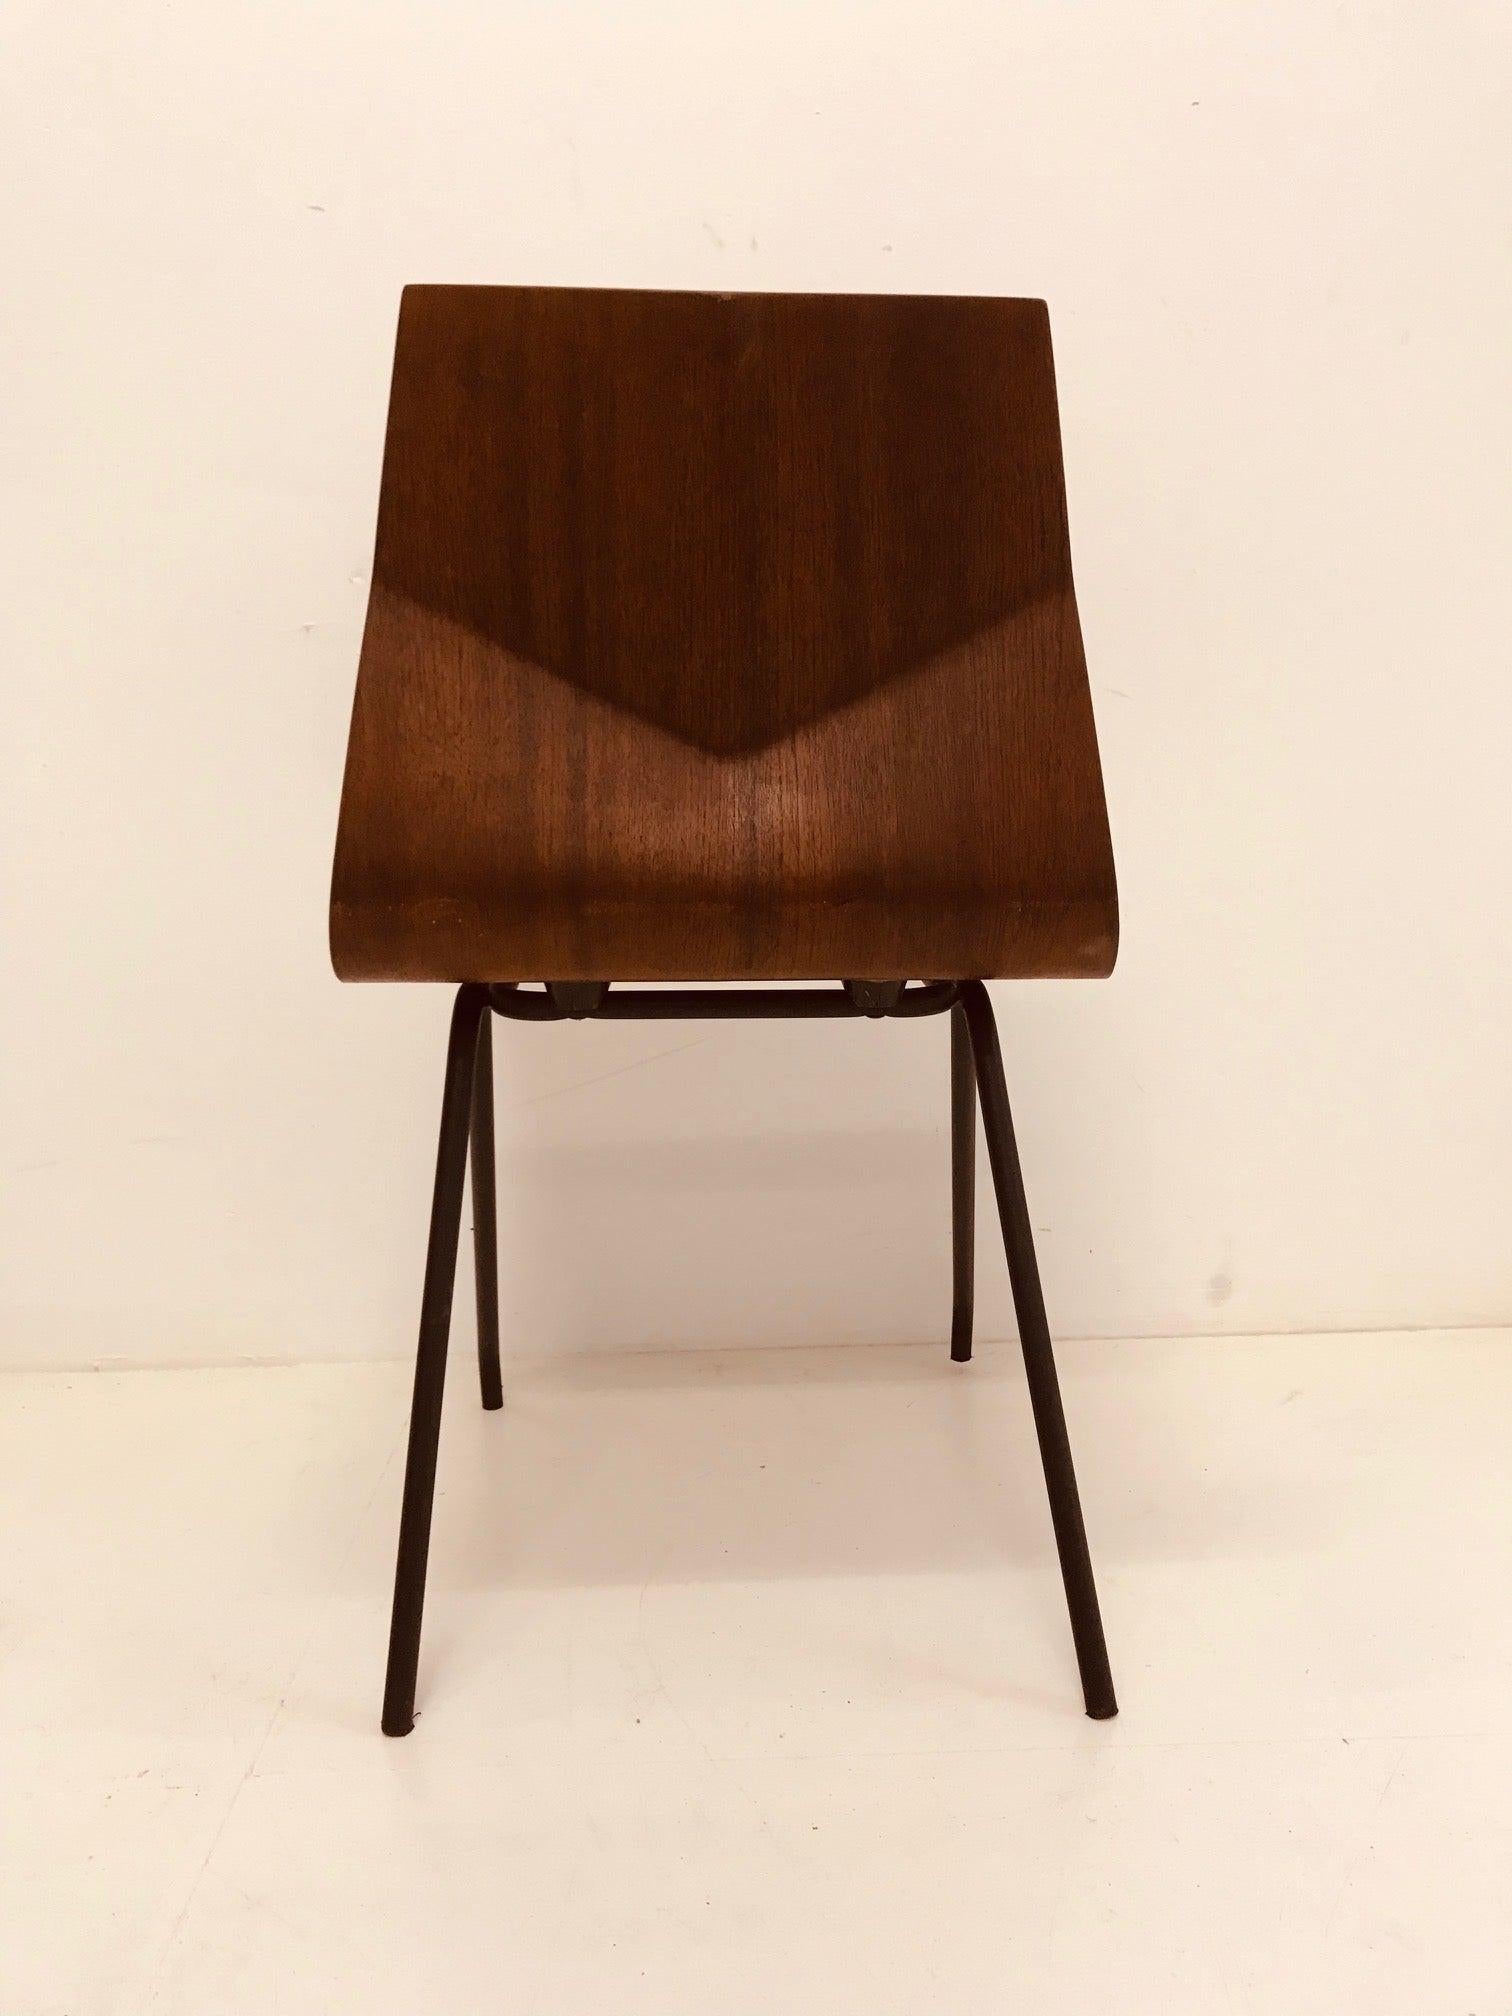 Mid-20th Century Daimond Chair by René-Jean Caillette, French Design, 1958